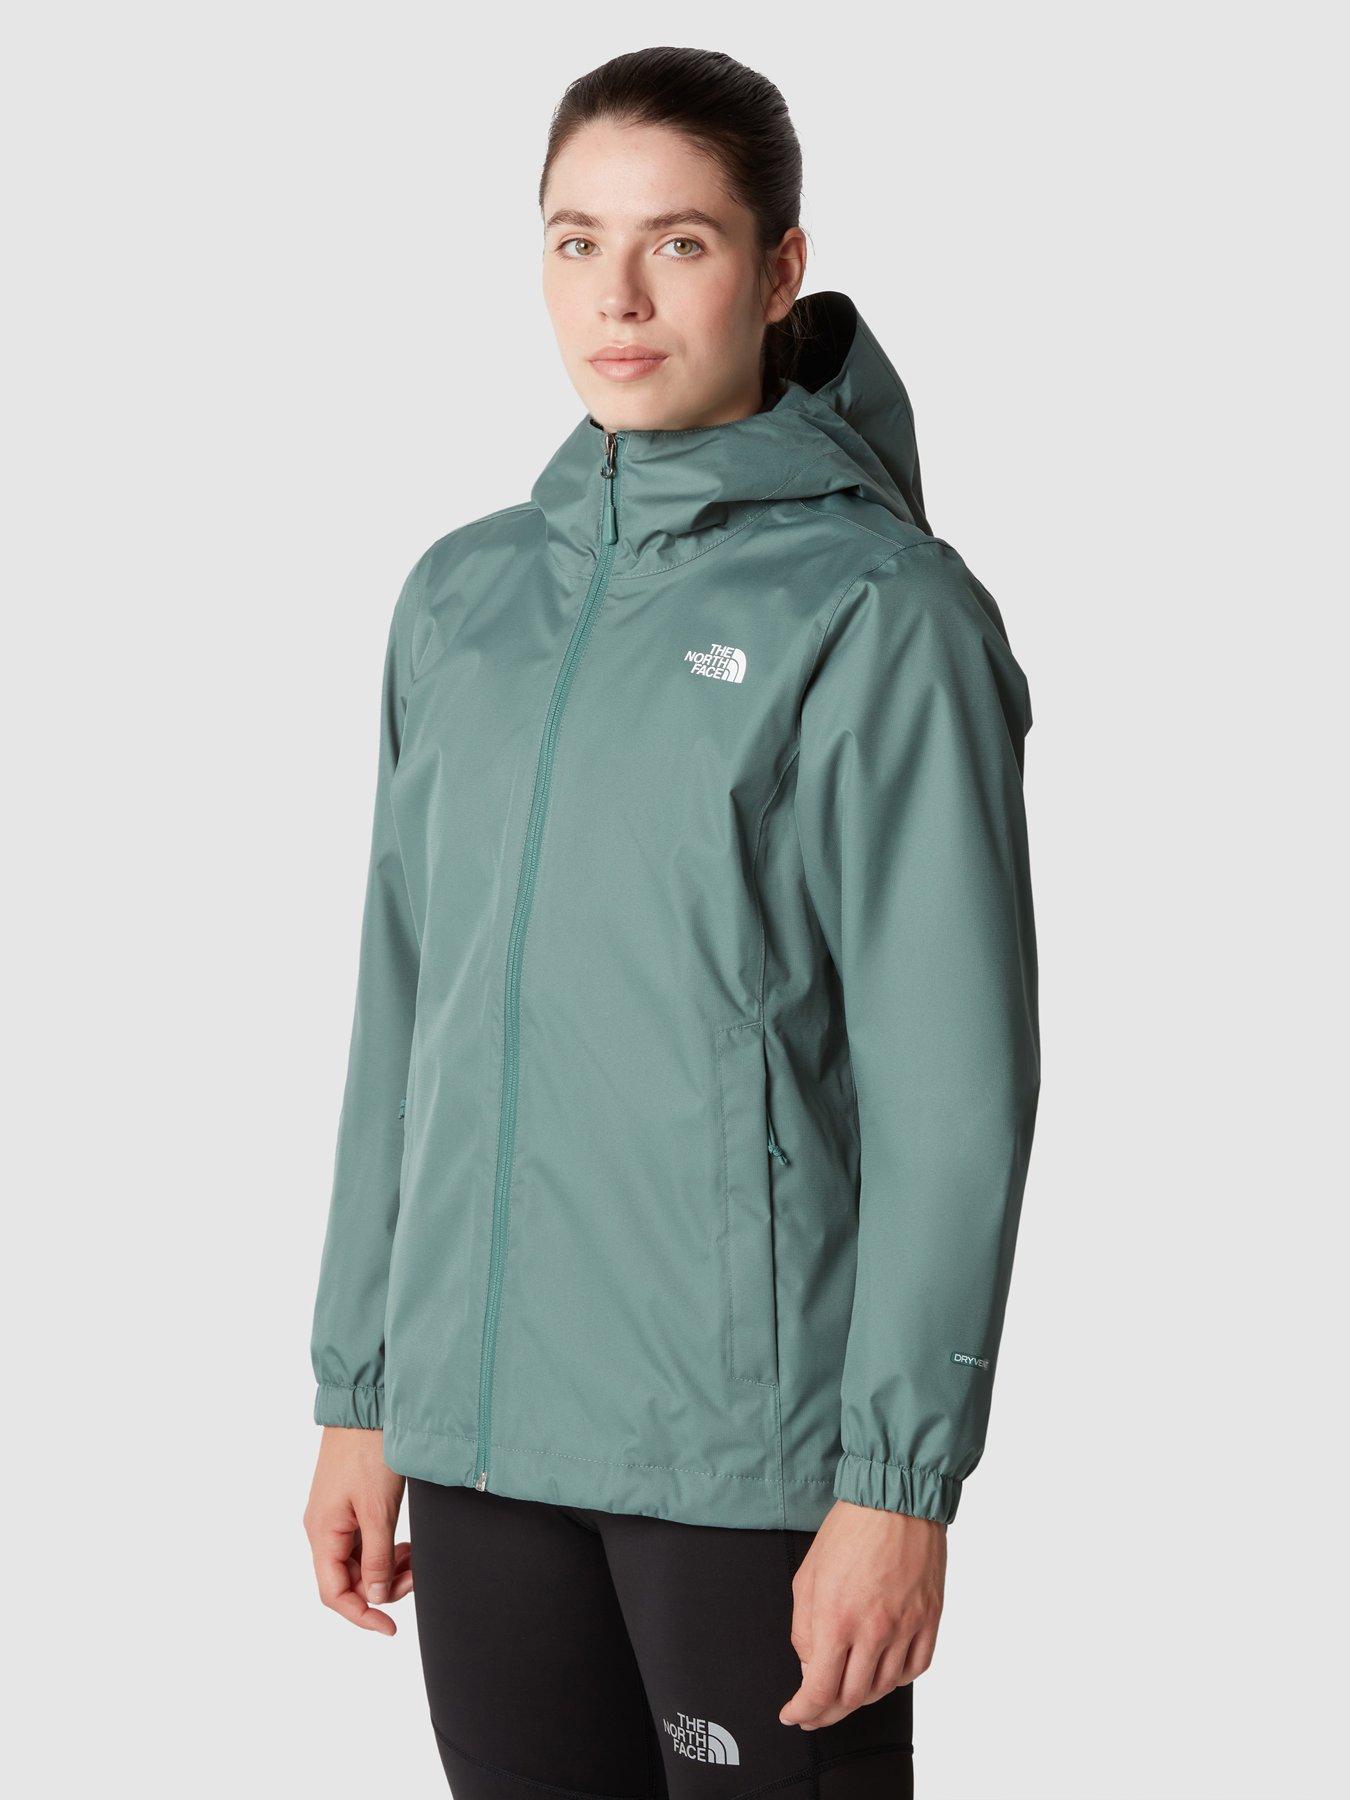 Women's THE NORTH FACE Jackets & Coats | Very.co.uk